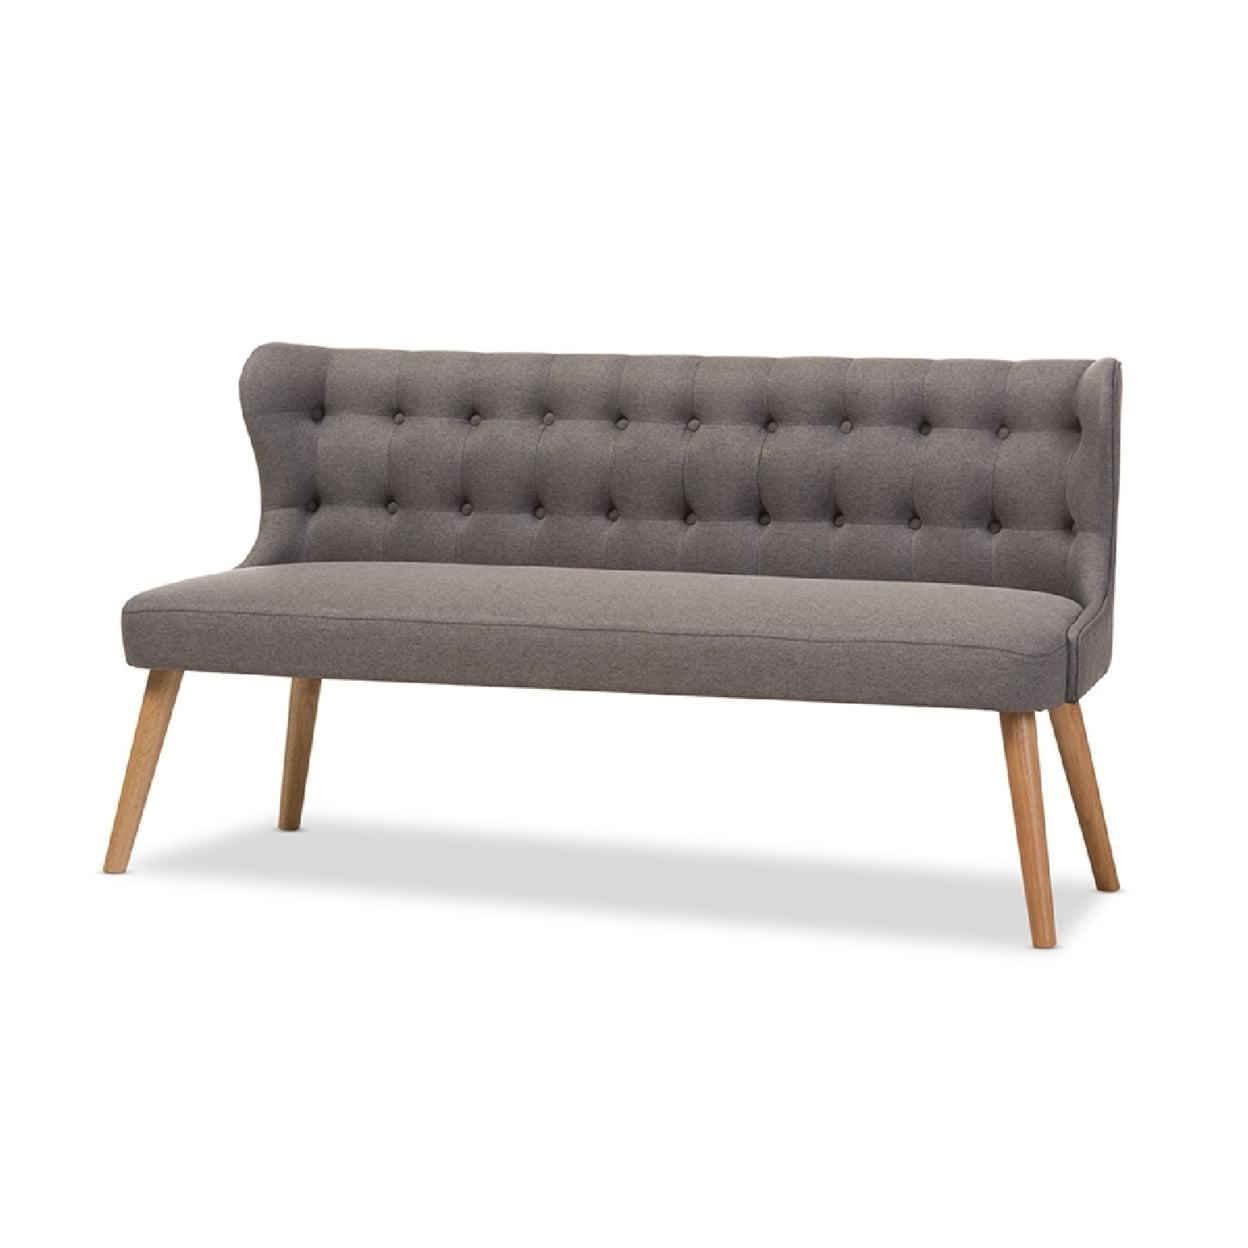 Melody Retro Brown Tufted Fabric 3-Seater Settee Bench